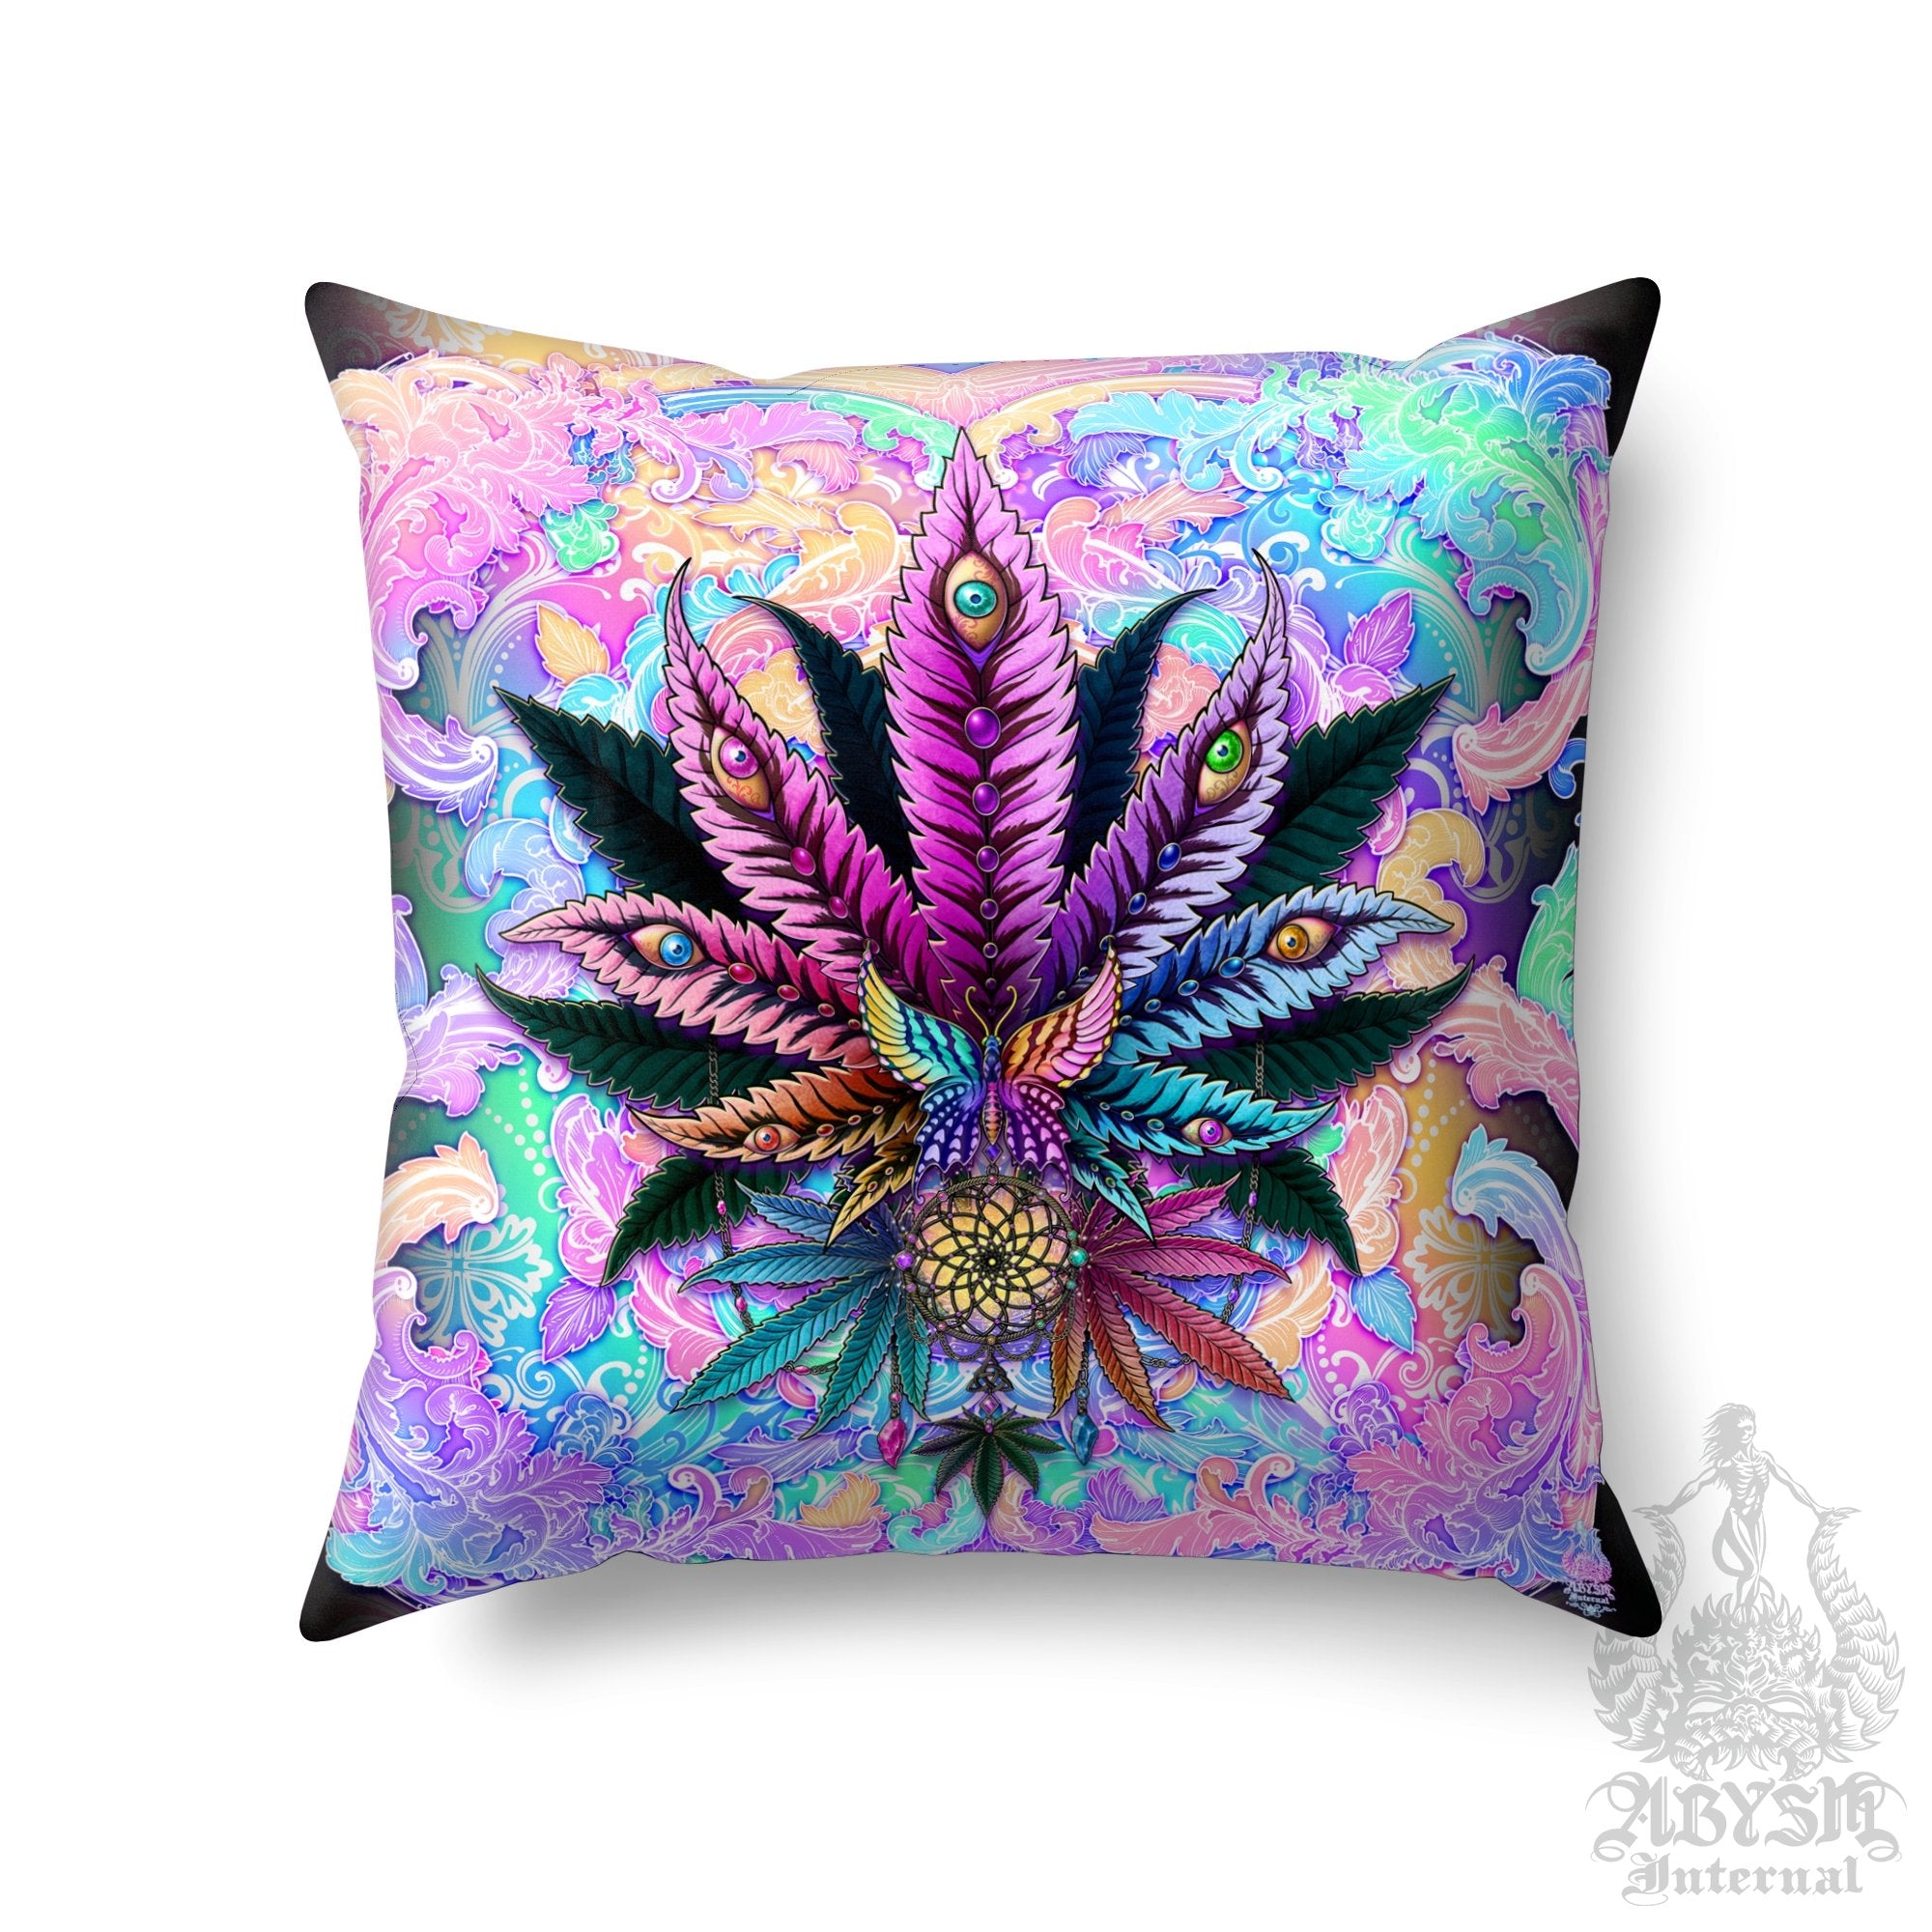 Weed Throw Pillow, Cannabis Shop Decor, Aesthetic Decorative Accent Cushion, Psychedelic Room Decor, 420 Art Print - Pastel Black - Abysm Internal